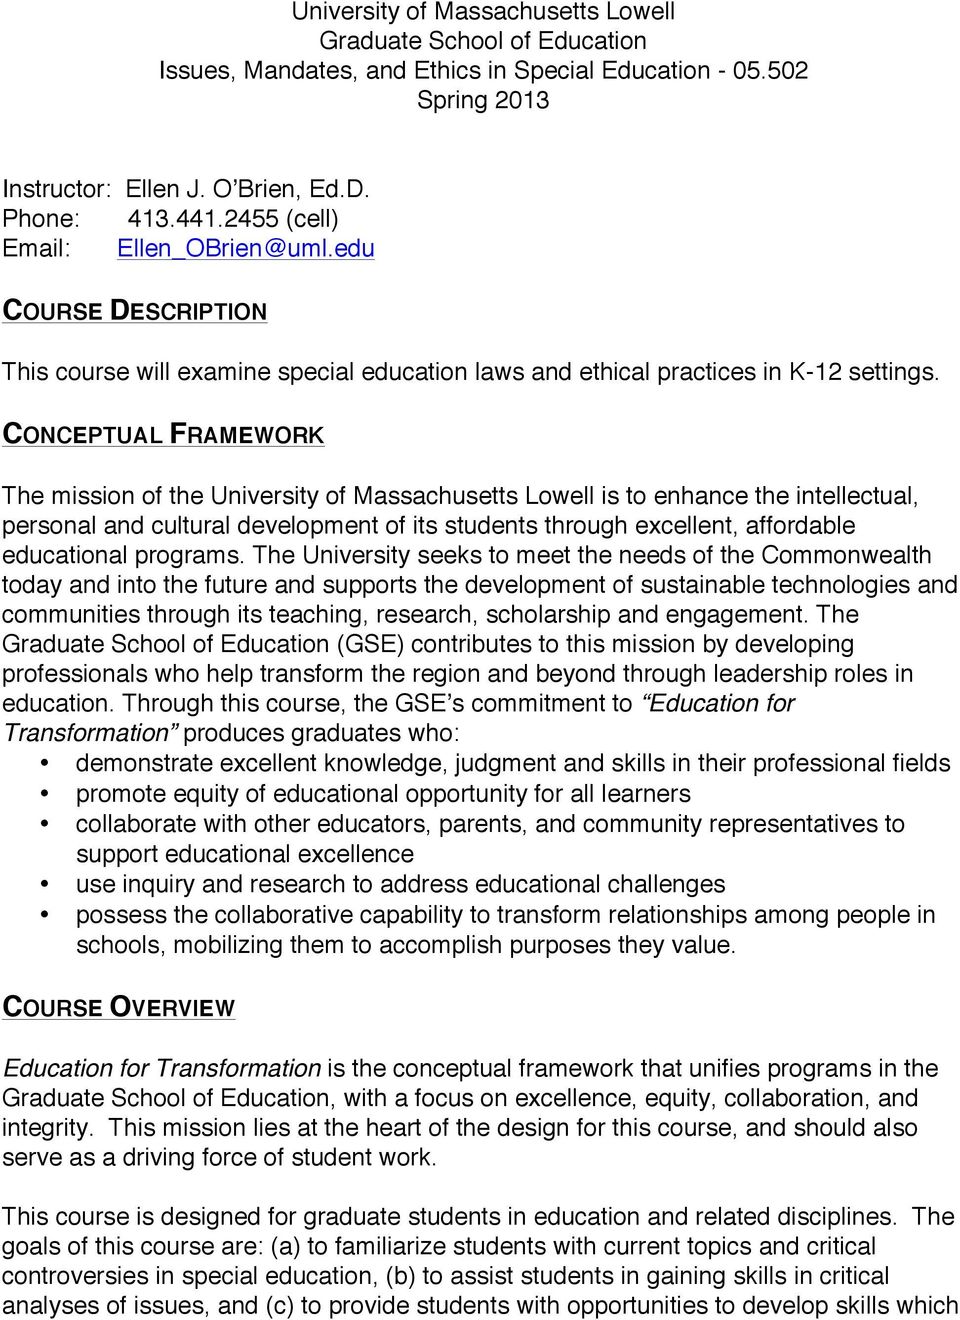 CONCEPTUAL FRAMEWORK The mission of the University of Massachusetts Lowell is to enhance the intellectual, personal and cultural development of its students through excellent, affordable educational